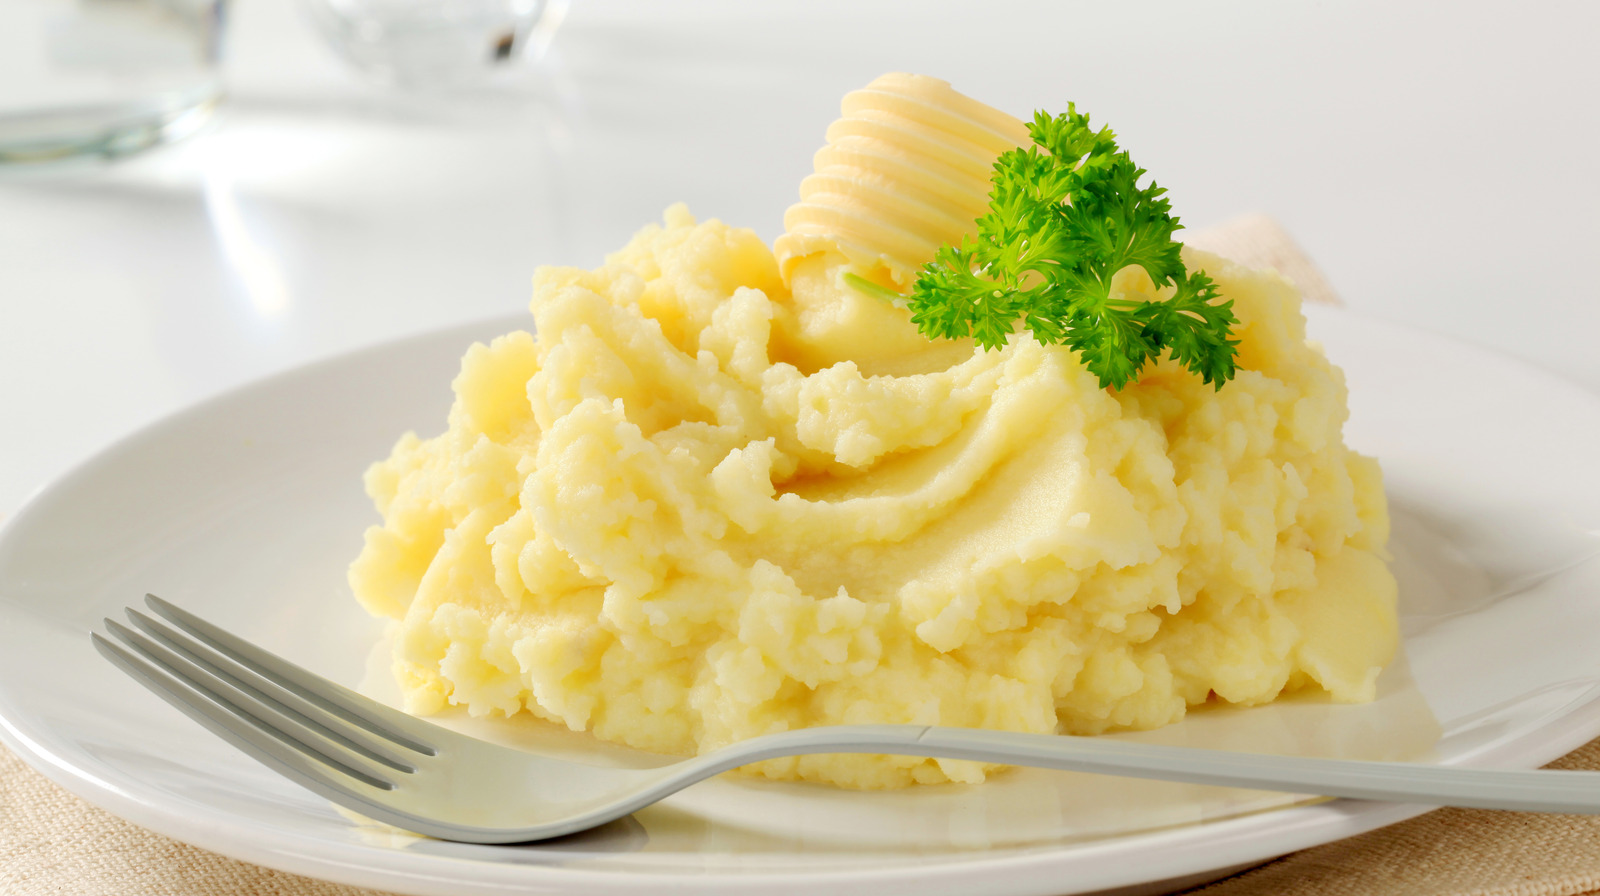 https://www.tastingtable.com/img/gallery/13-tips-you-need-for-the-best-mashed-potatoes/l-intro-1694443937.jpg